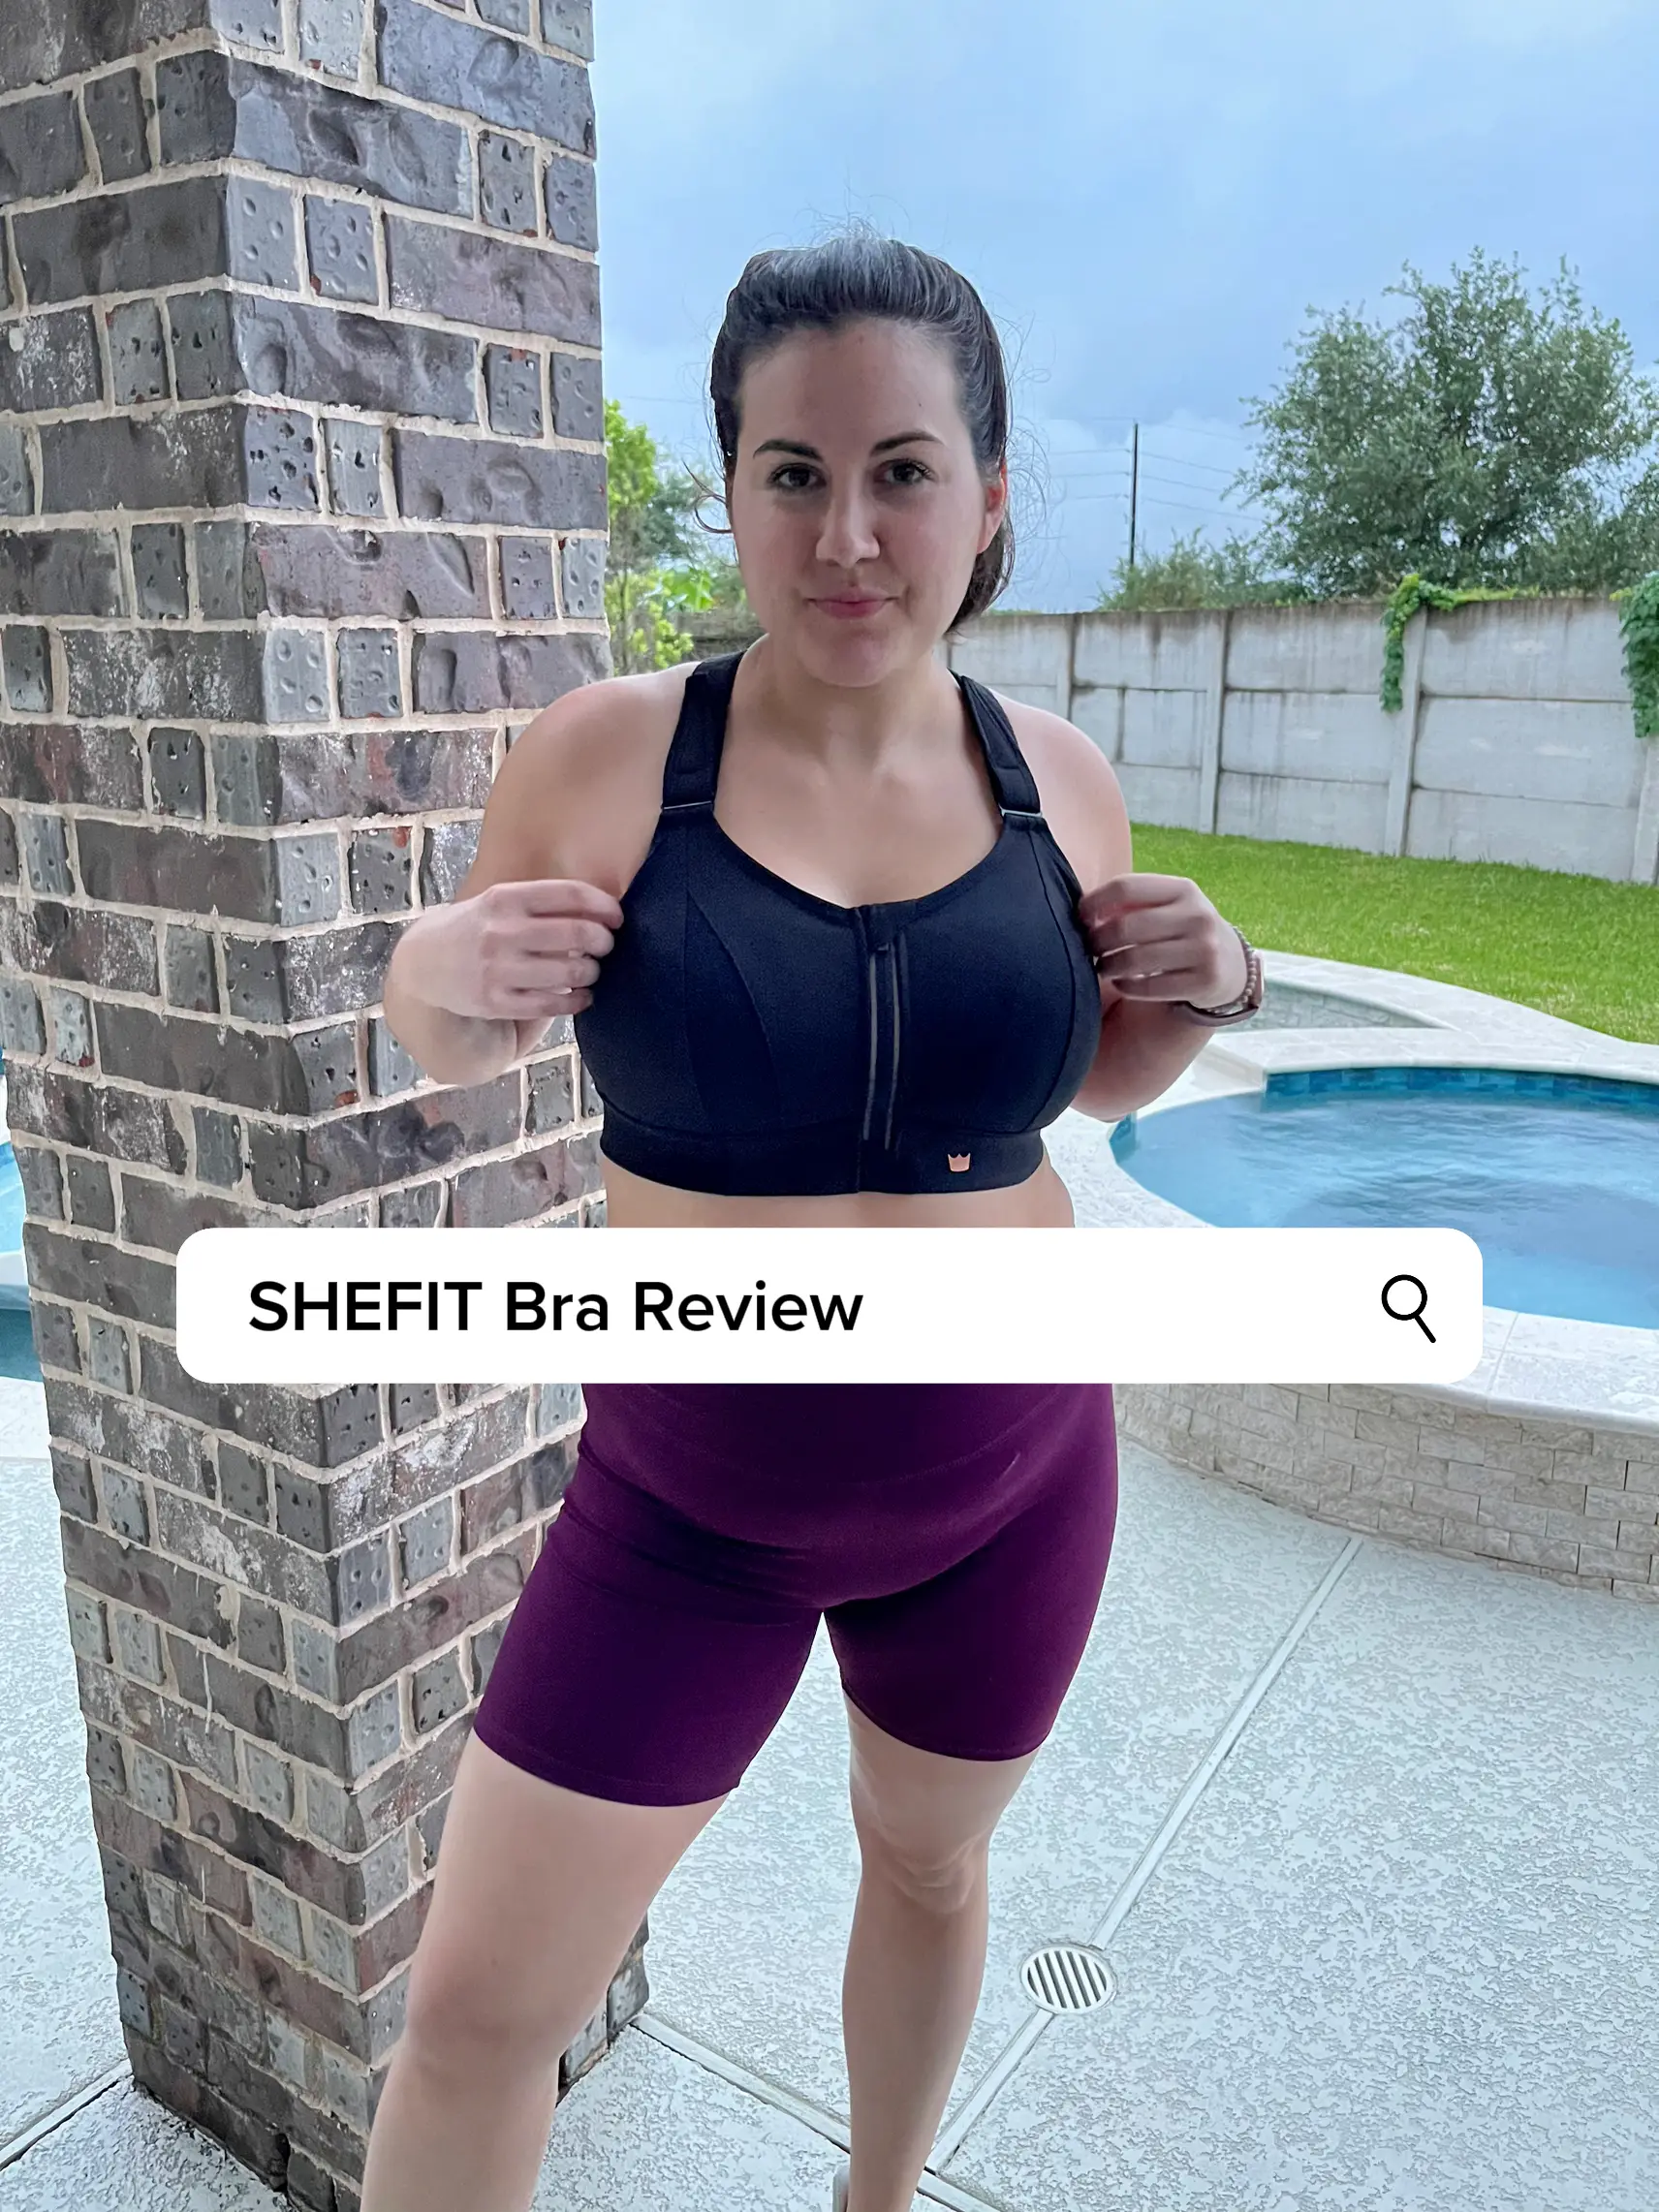 Real Women, Real Reviews For You - SHEFIT